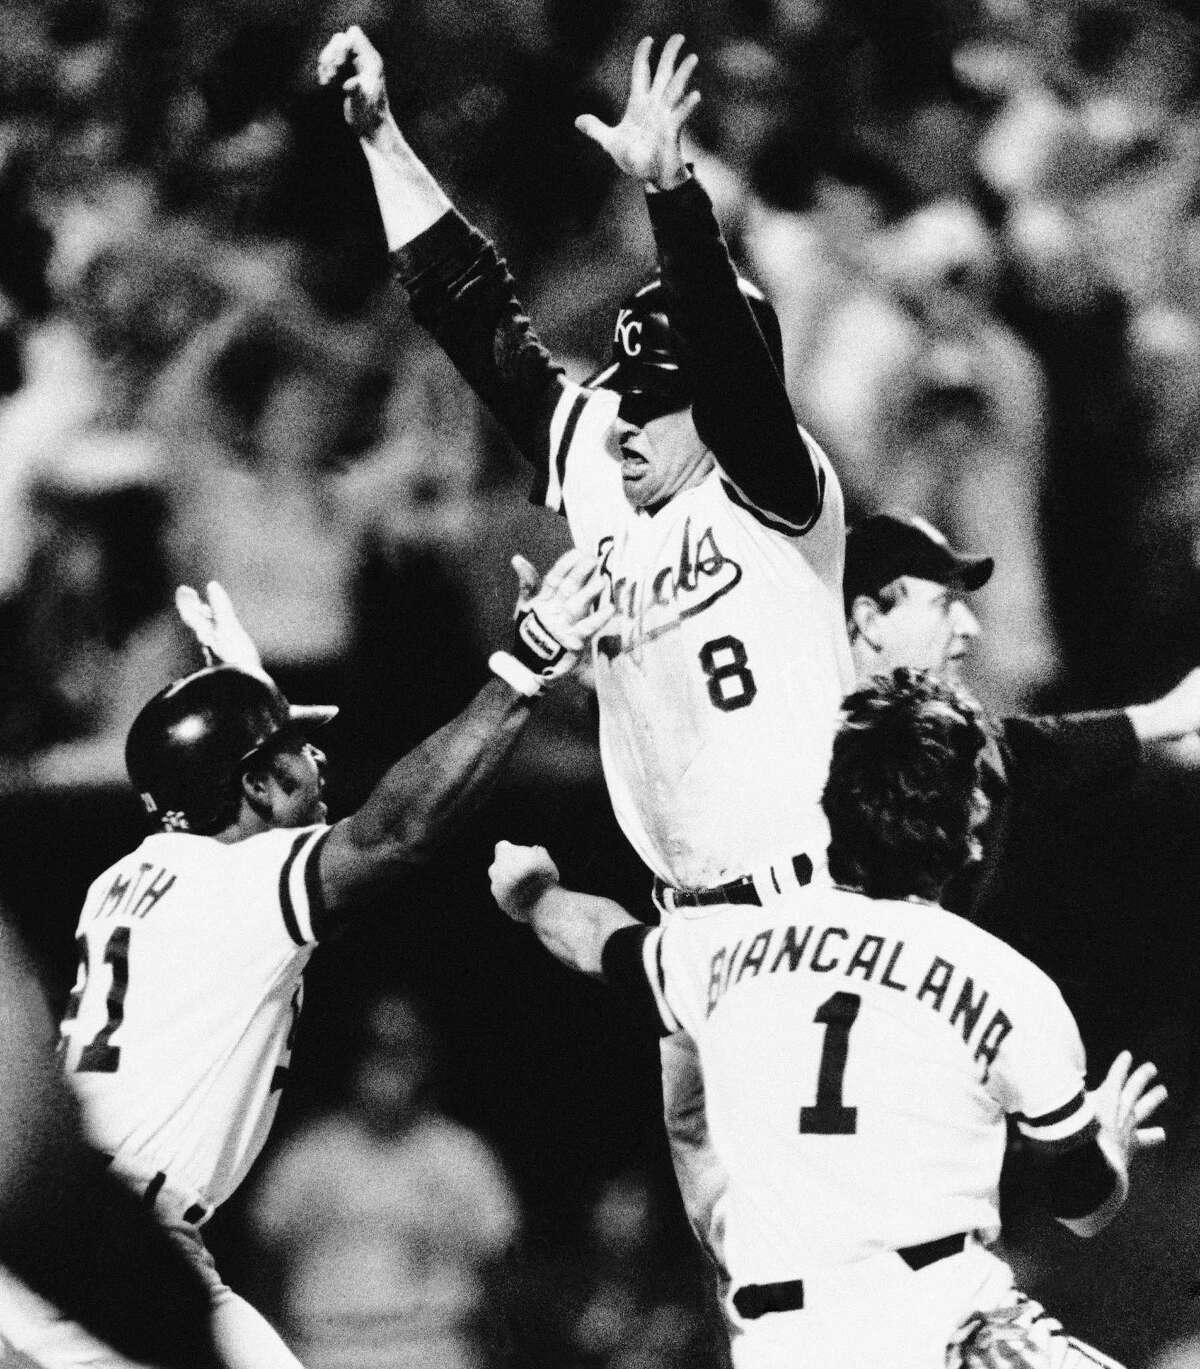 Kansas City Royals Jim Sundberg (8) leaps into the arms of teammates Lonnie Smith, left, and Buddy Biancalana after Sundberg scored in the ninth inning to beat the St. Louis Cardinals, 2-1, in a World Series game, Saturday, Oct. 26, 1985, Kansas City, Mo. (AP Photo/Rusty Kennedy)